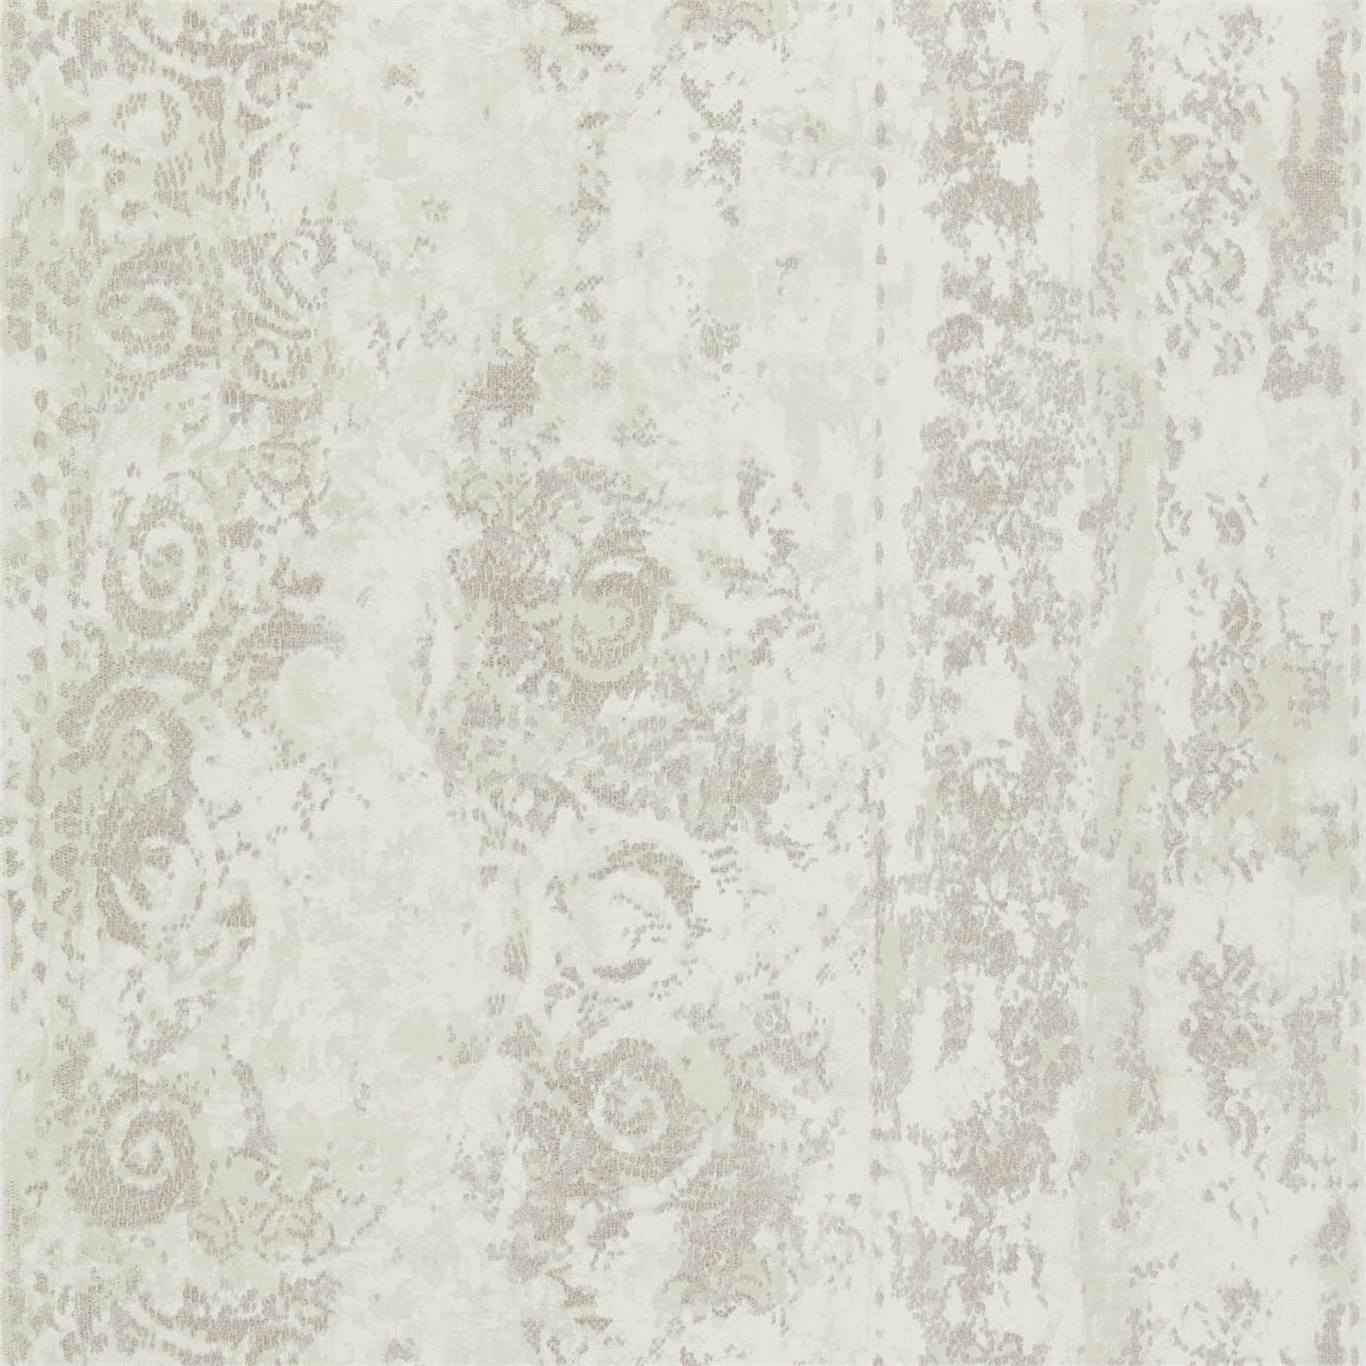 Pozzolana Alabaster Wallpaper EVIW112027 by Harlequin